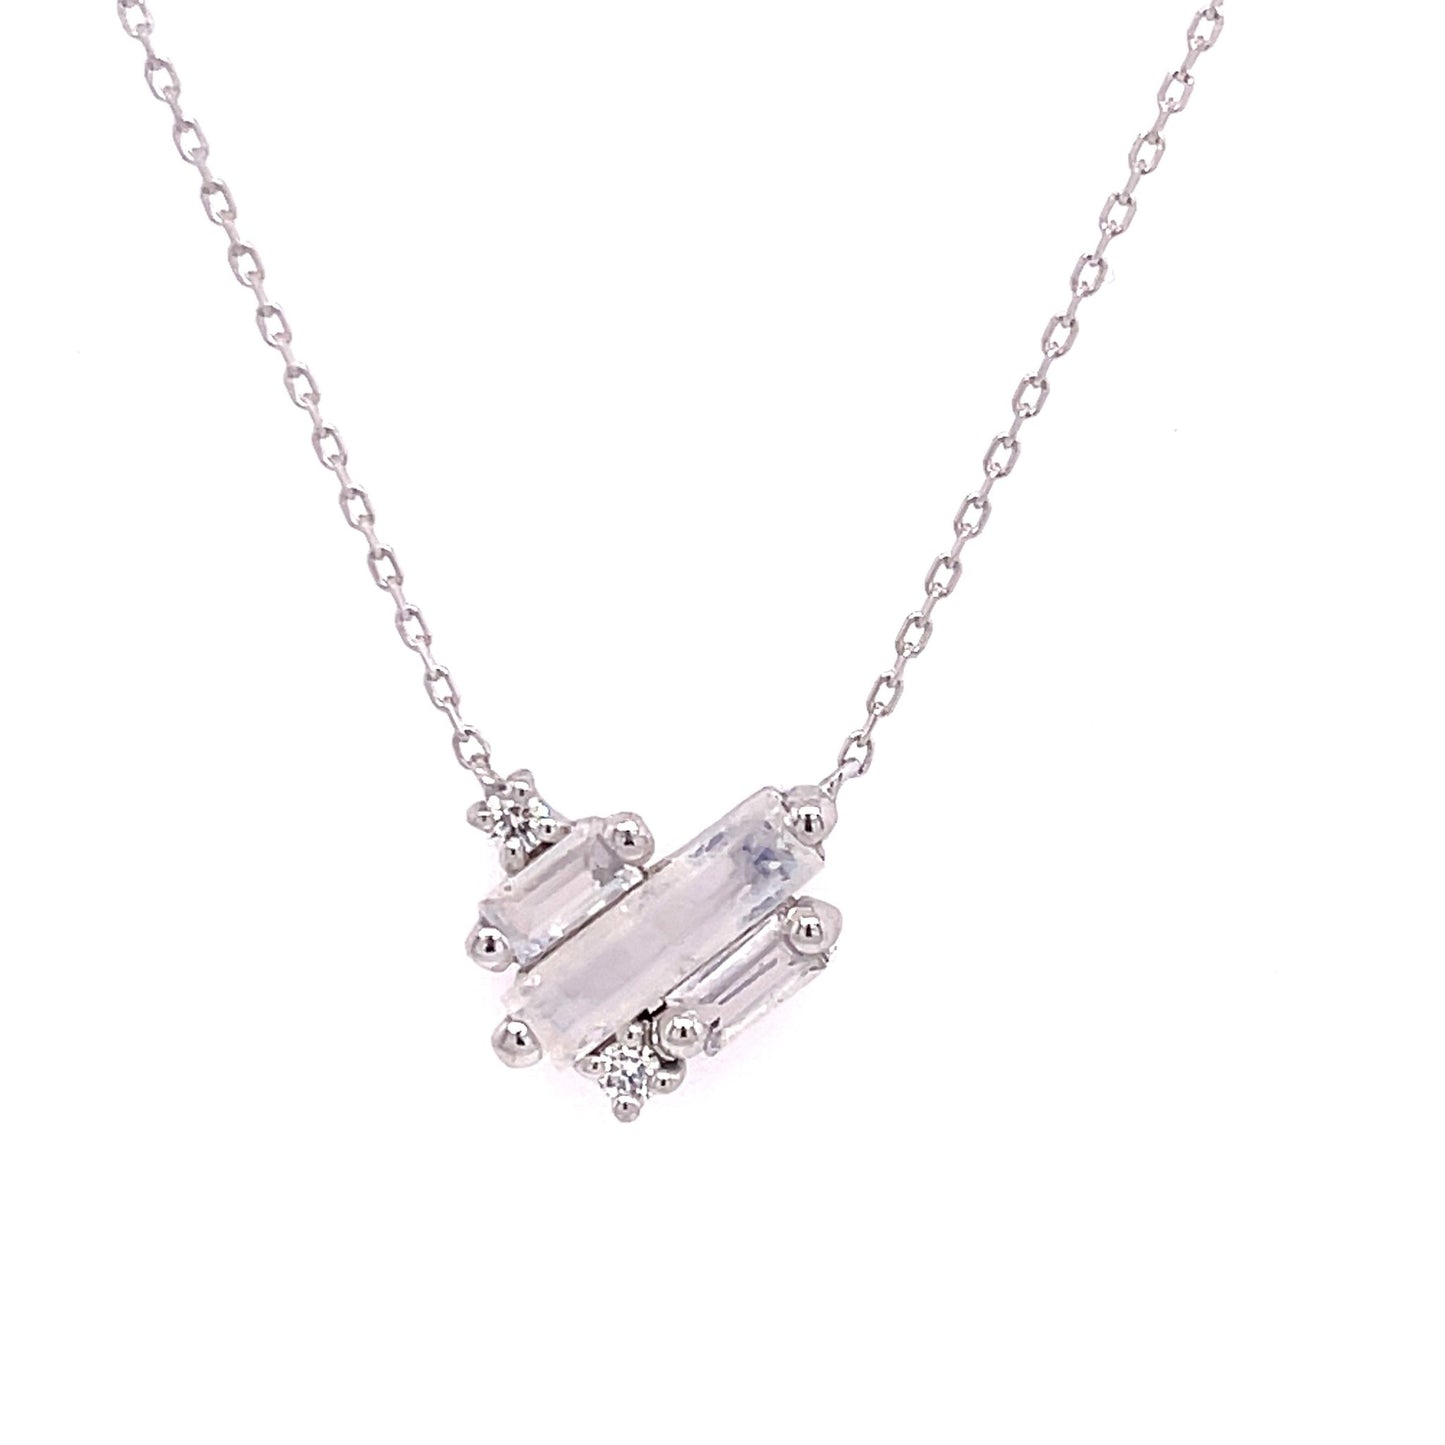 Mini Heart Cluster Necklace - Agave in Bloom